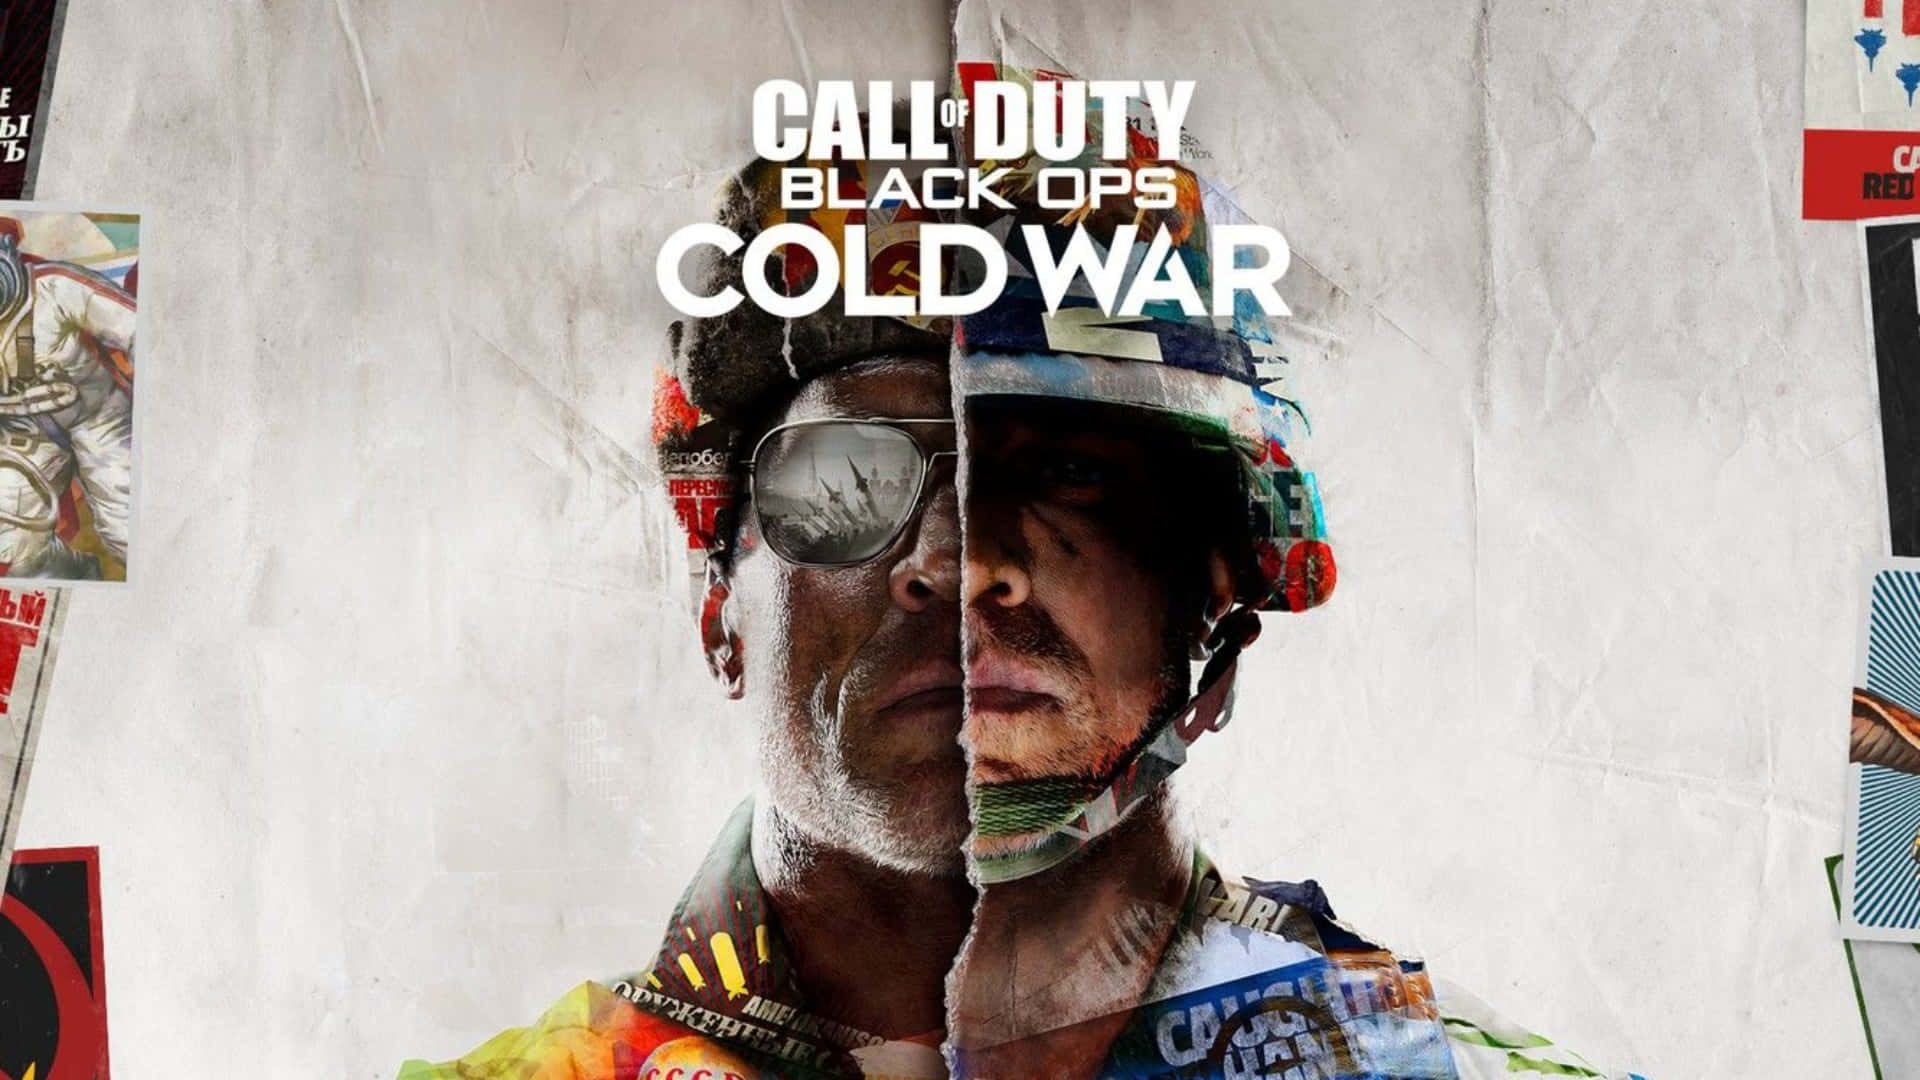 Ready for Call of Duty Black Ops Cold War?